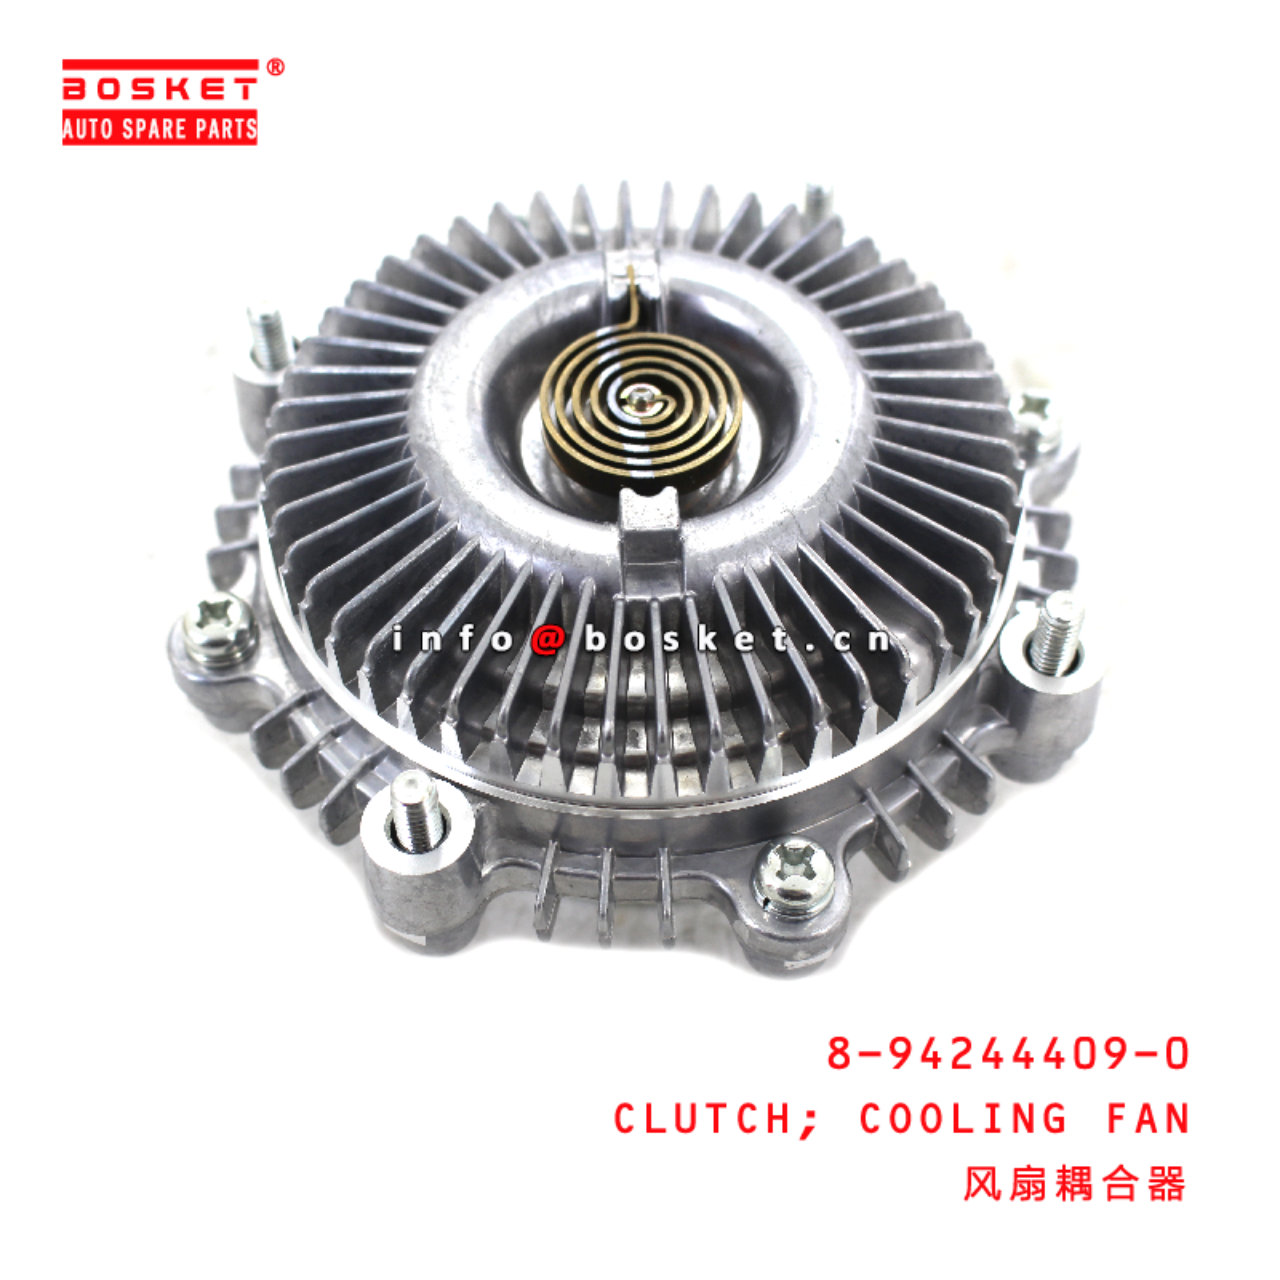 8-94244409-0 Cooling Fan Clutch suitable for ISUZU...